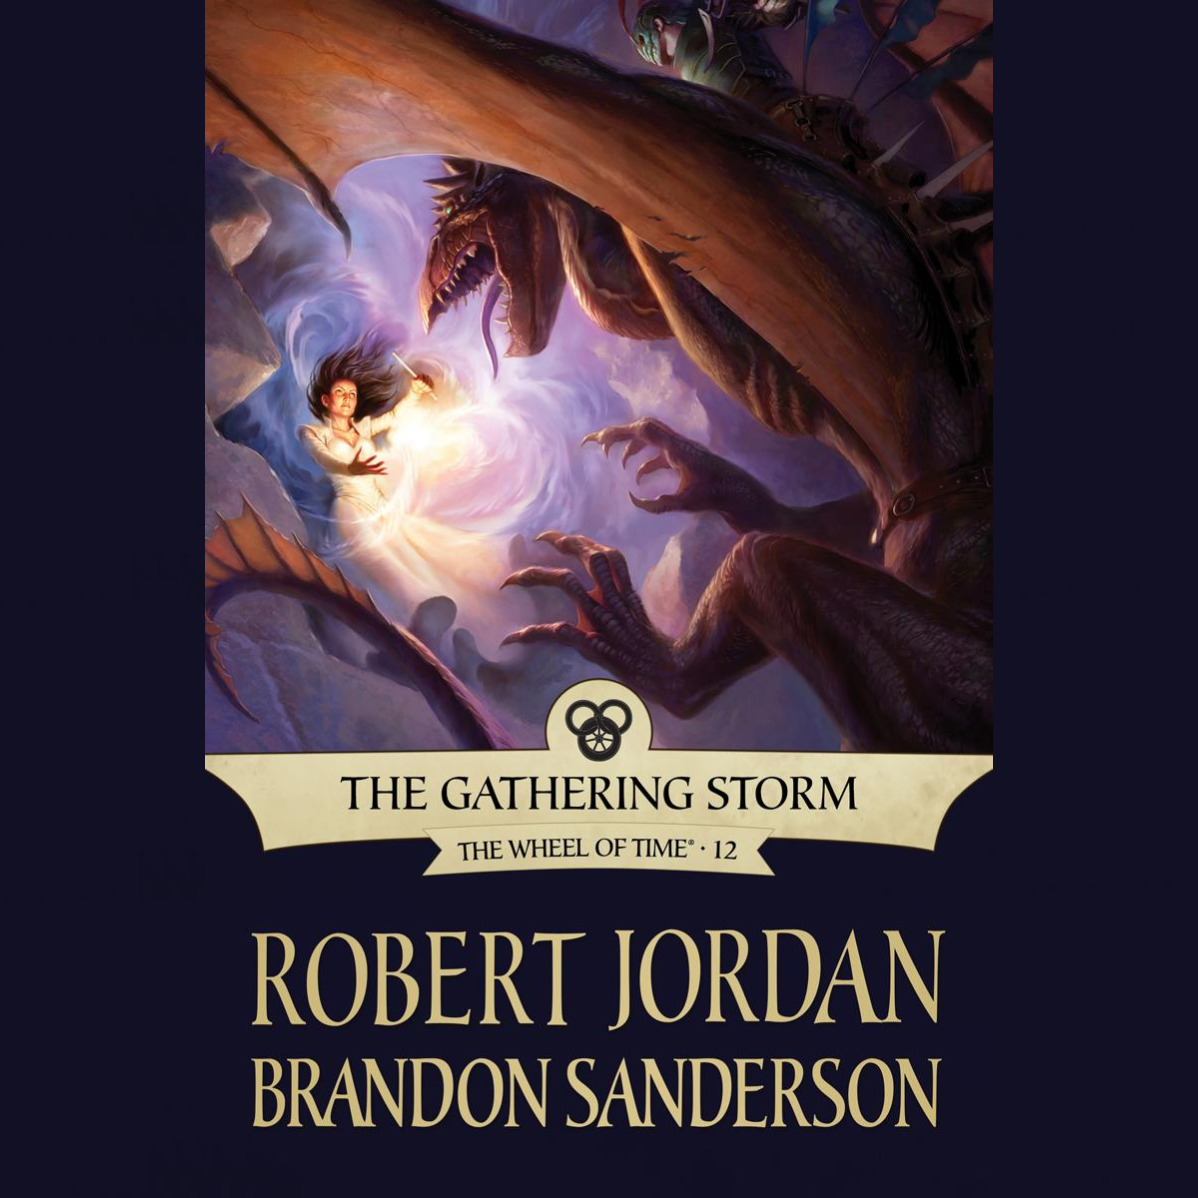 The Wheel Of Time #12: The Gathering Storm